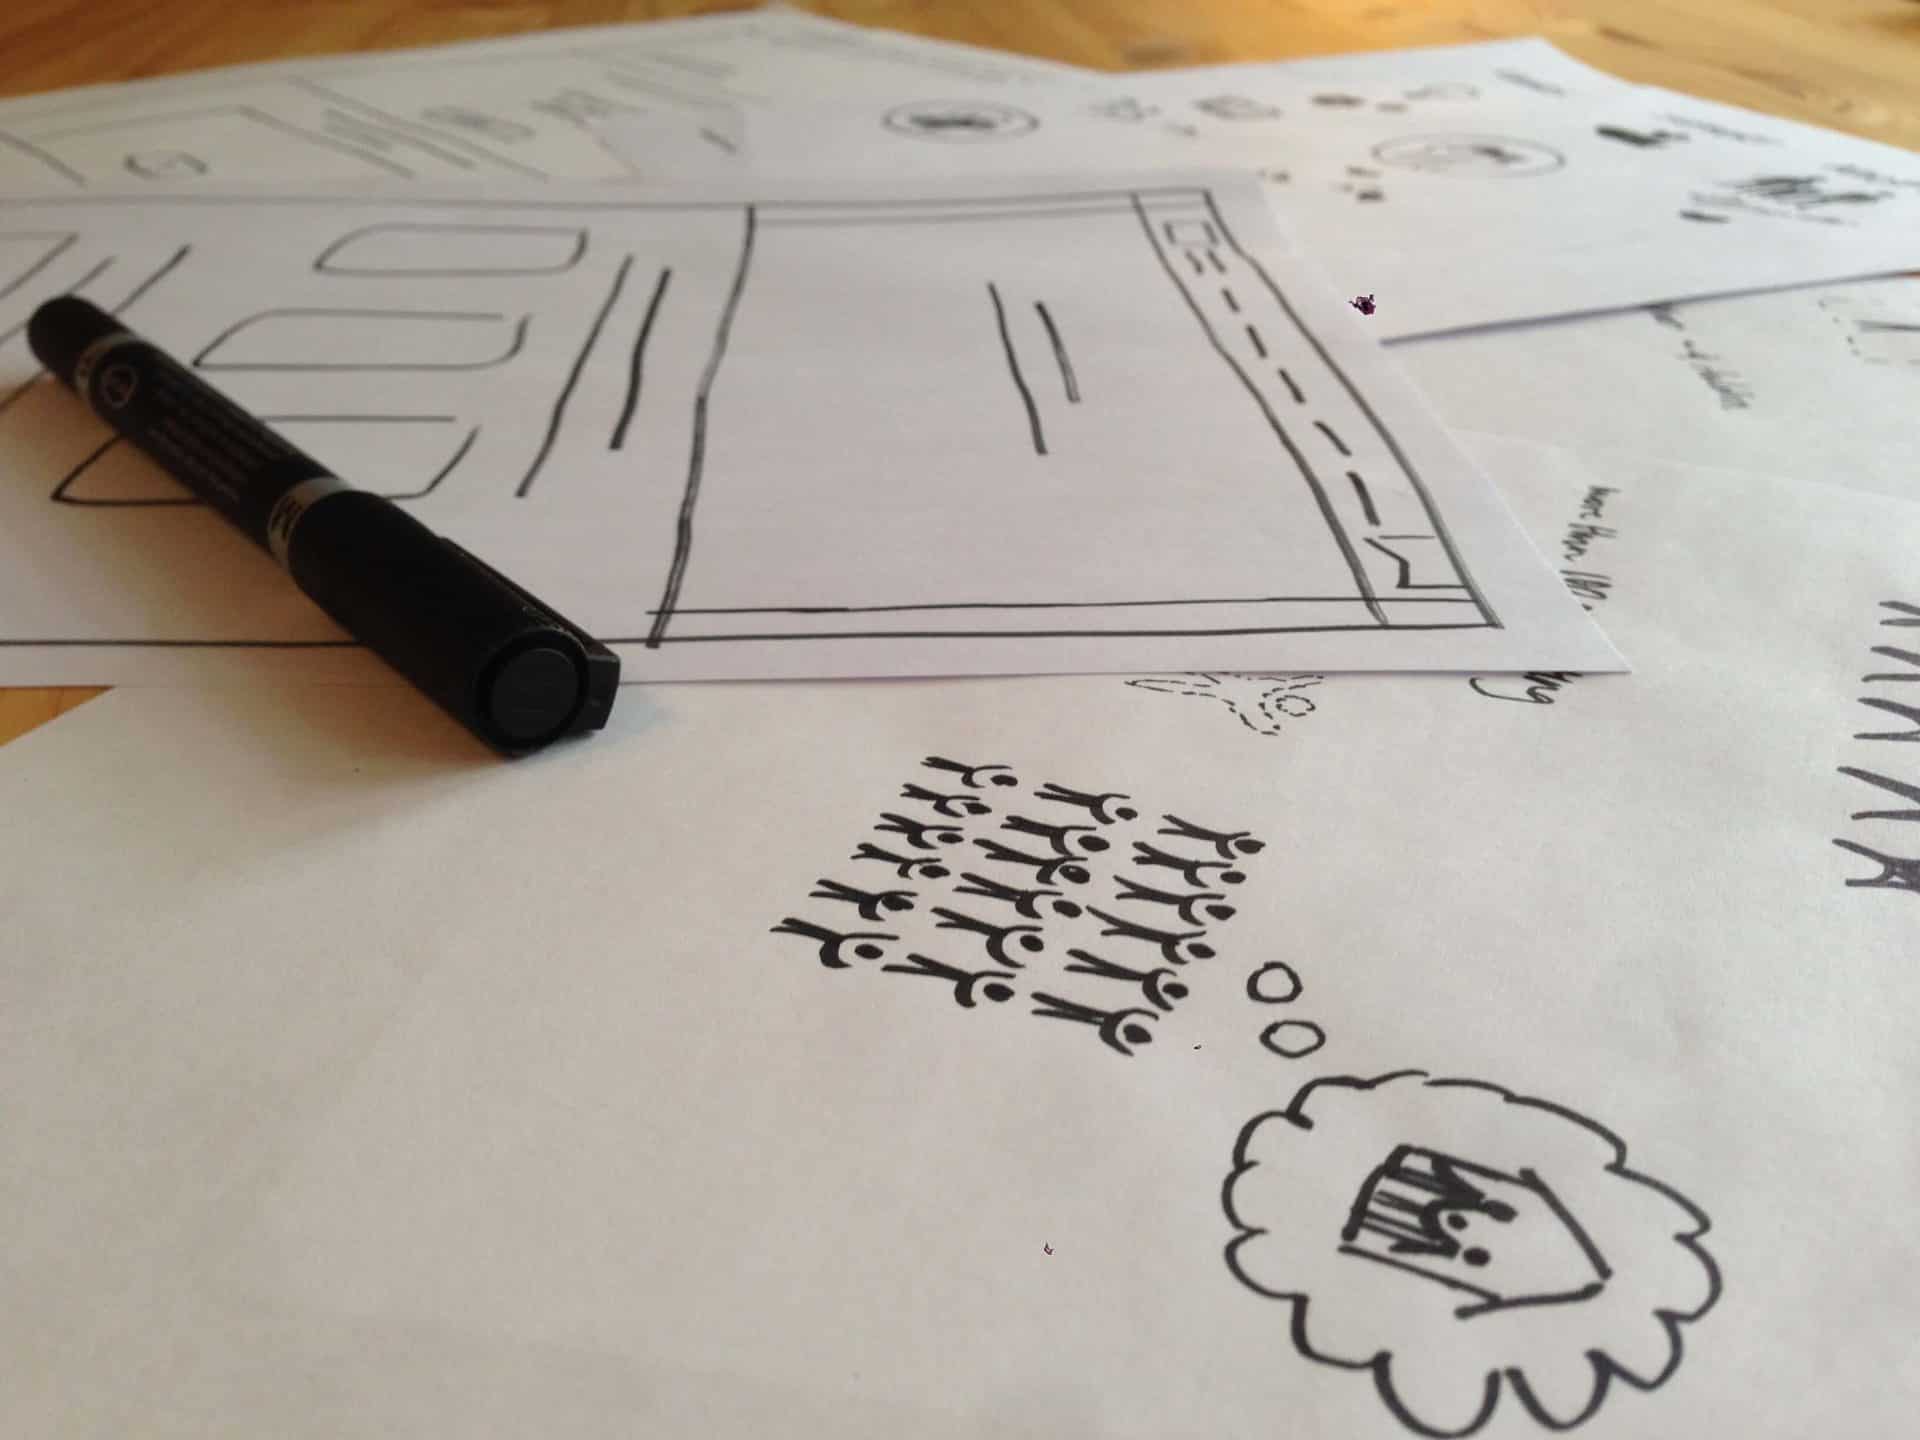 A prototype drawing session CauseLabs did with DTFA for their website redesign